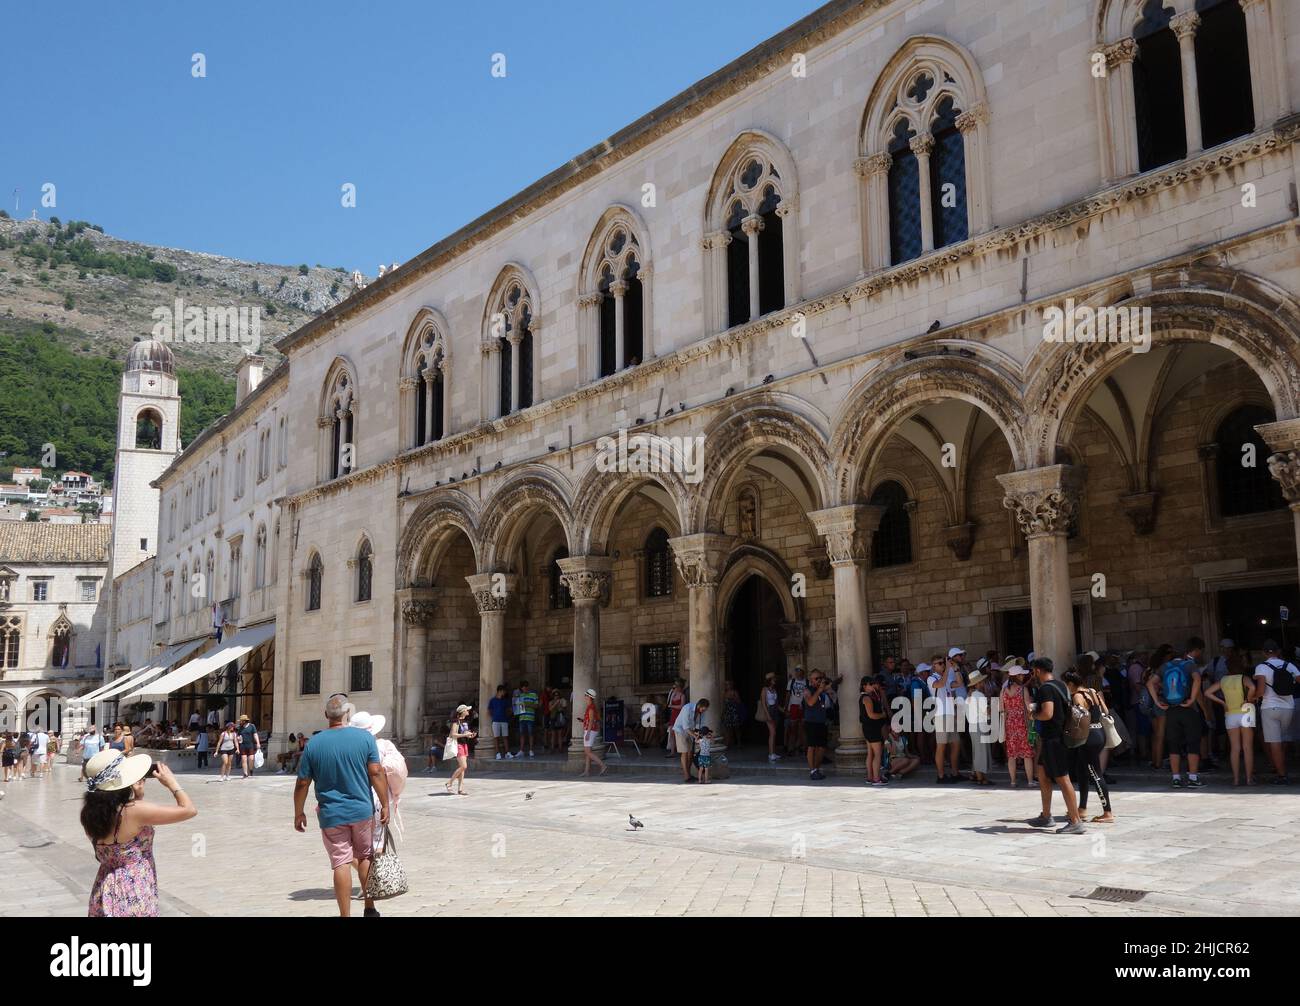 The Rector's Palace, Dubrovnik. Well known for featuring in Game of Thrones. Stock Photo